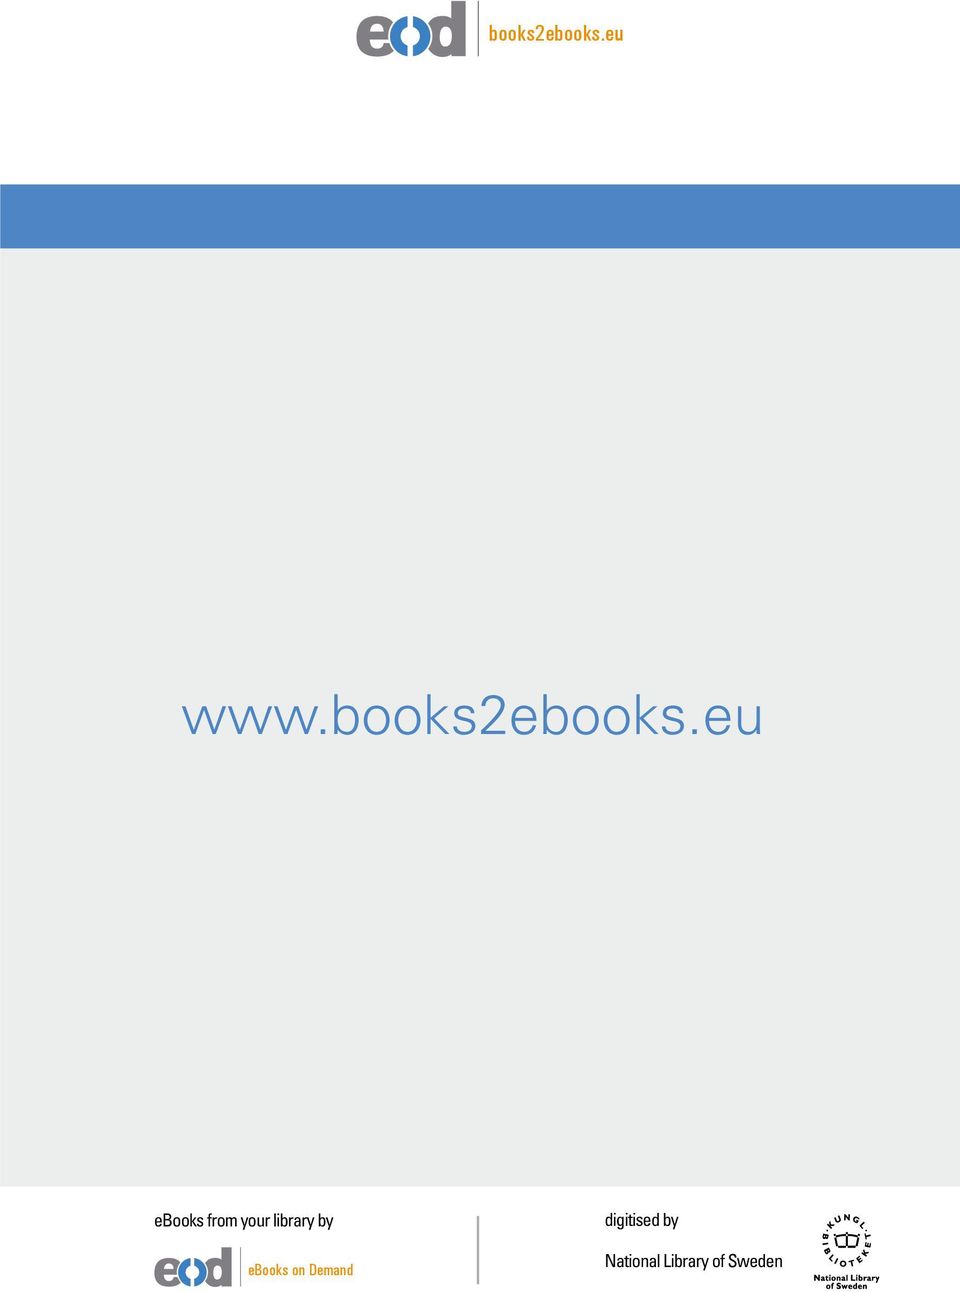 eu ebooks from your library